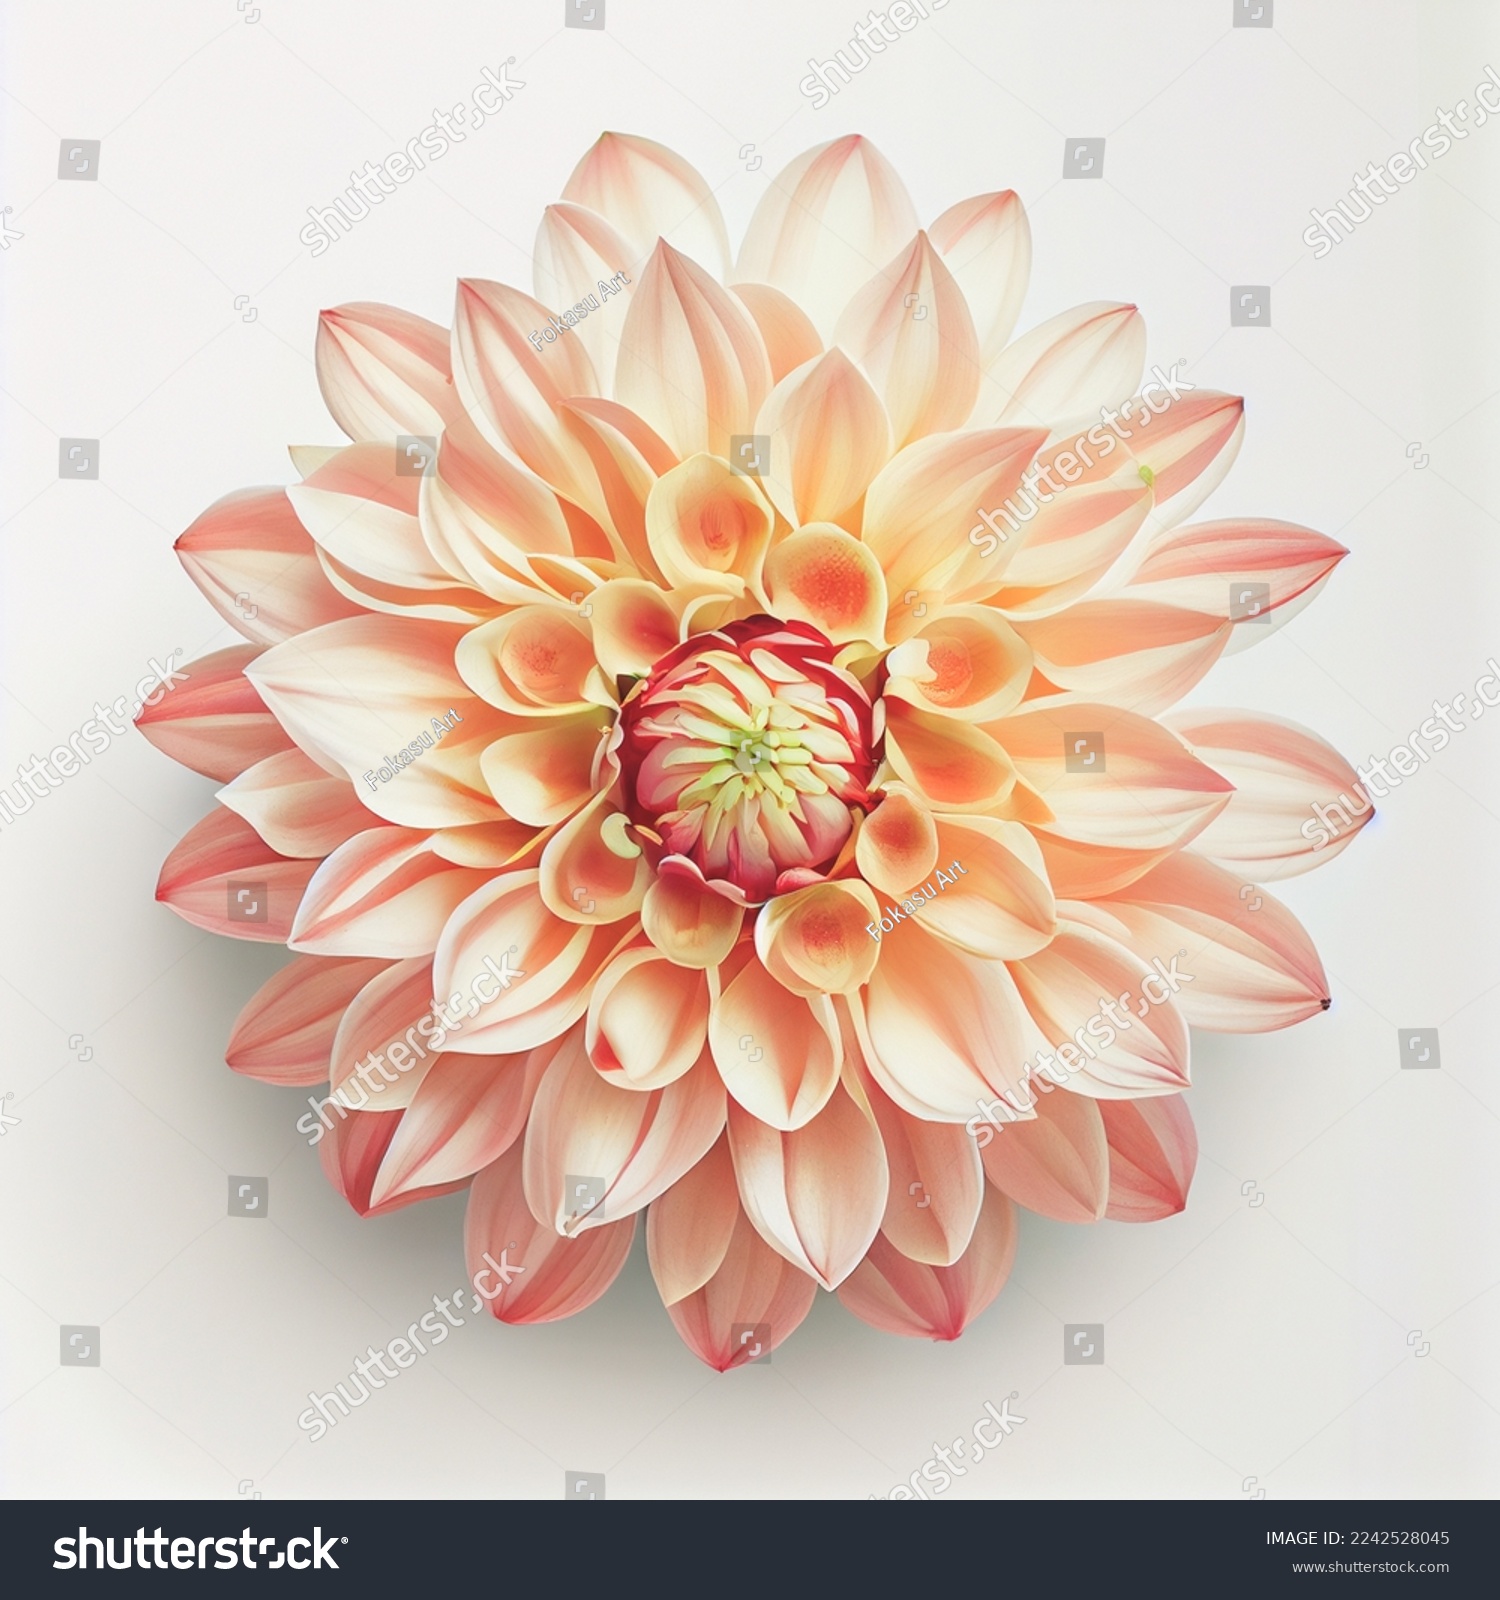 Top view of Dahlia flower on a white background, perfect for representing the theme of Valentine's Day. #2242528045